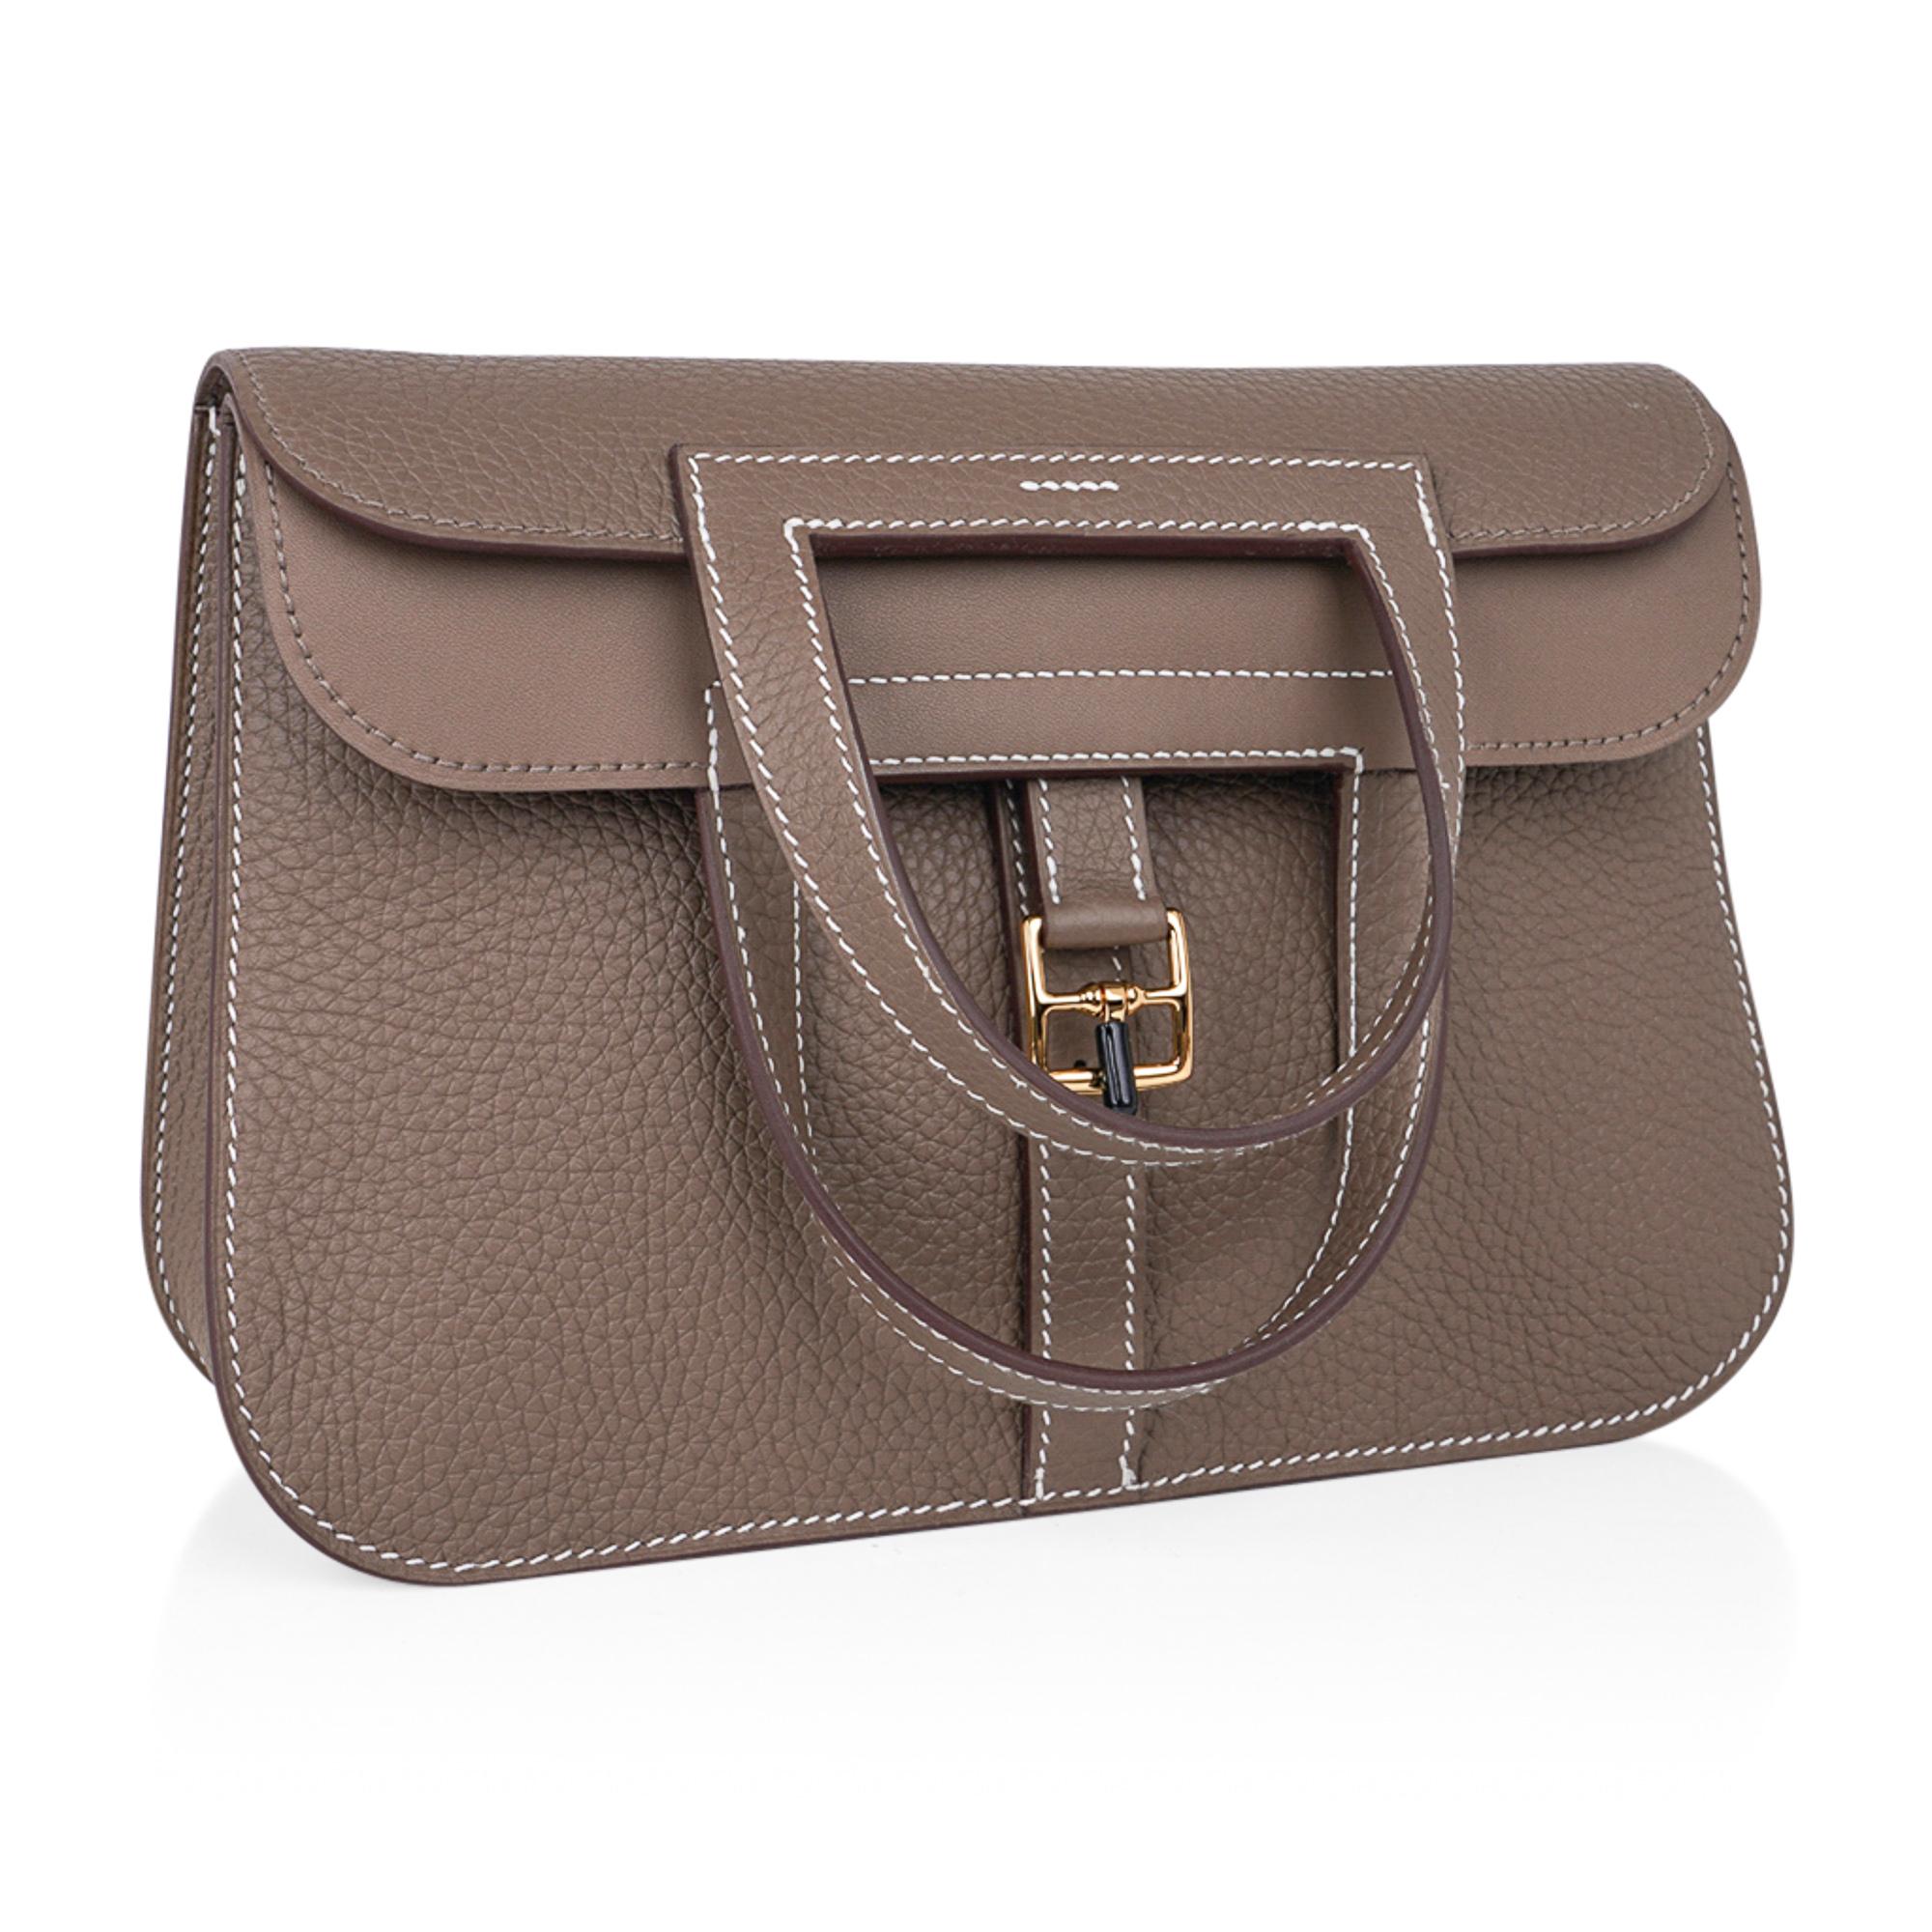 Guaranteed authentic Hermes Halzan 25 bag featured in Etoupe Clemence leather.
Lush with Gold hardware.
Plush Clemence leather.
Versatile three-way bag.
The Hermes Halzan bag is a fresh take on the messenger with the crossbody strap.
Fold over with